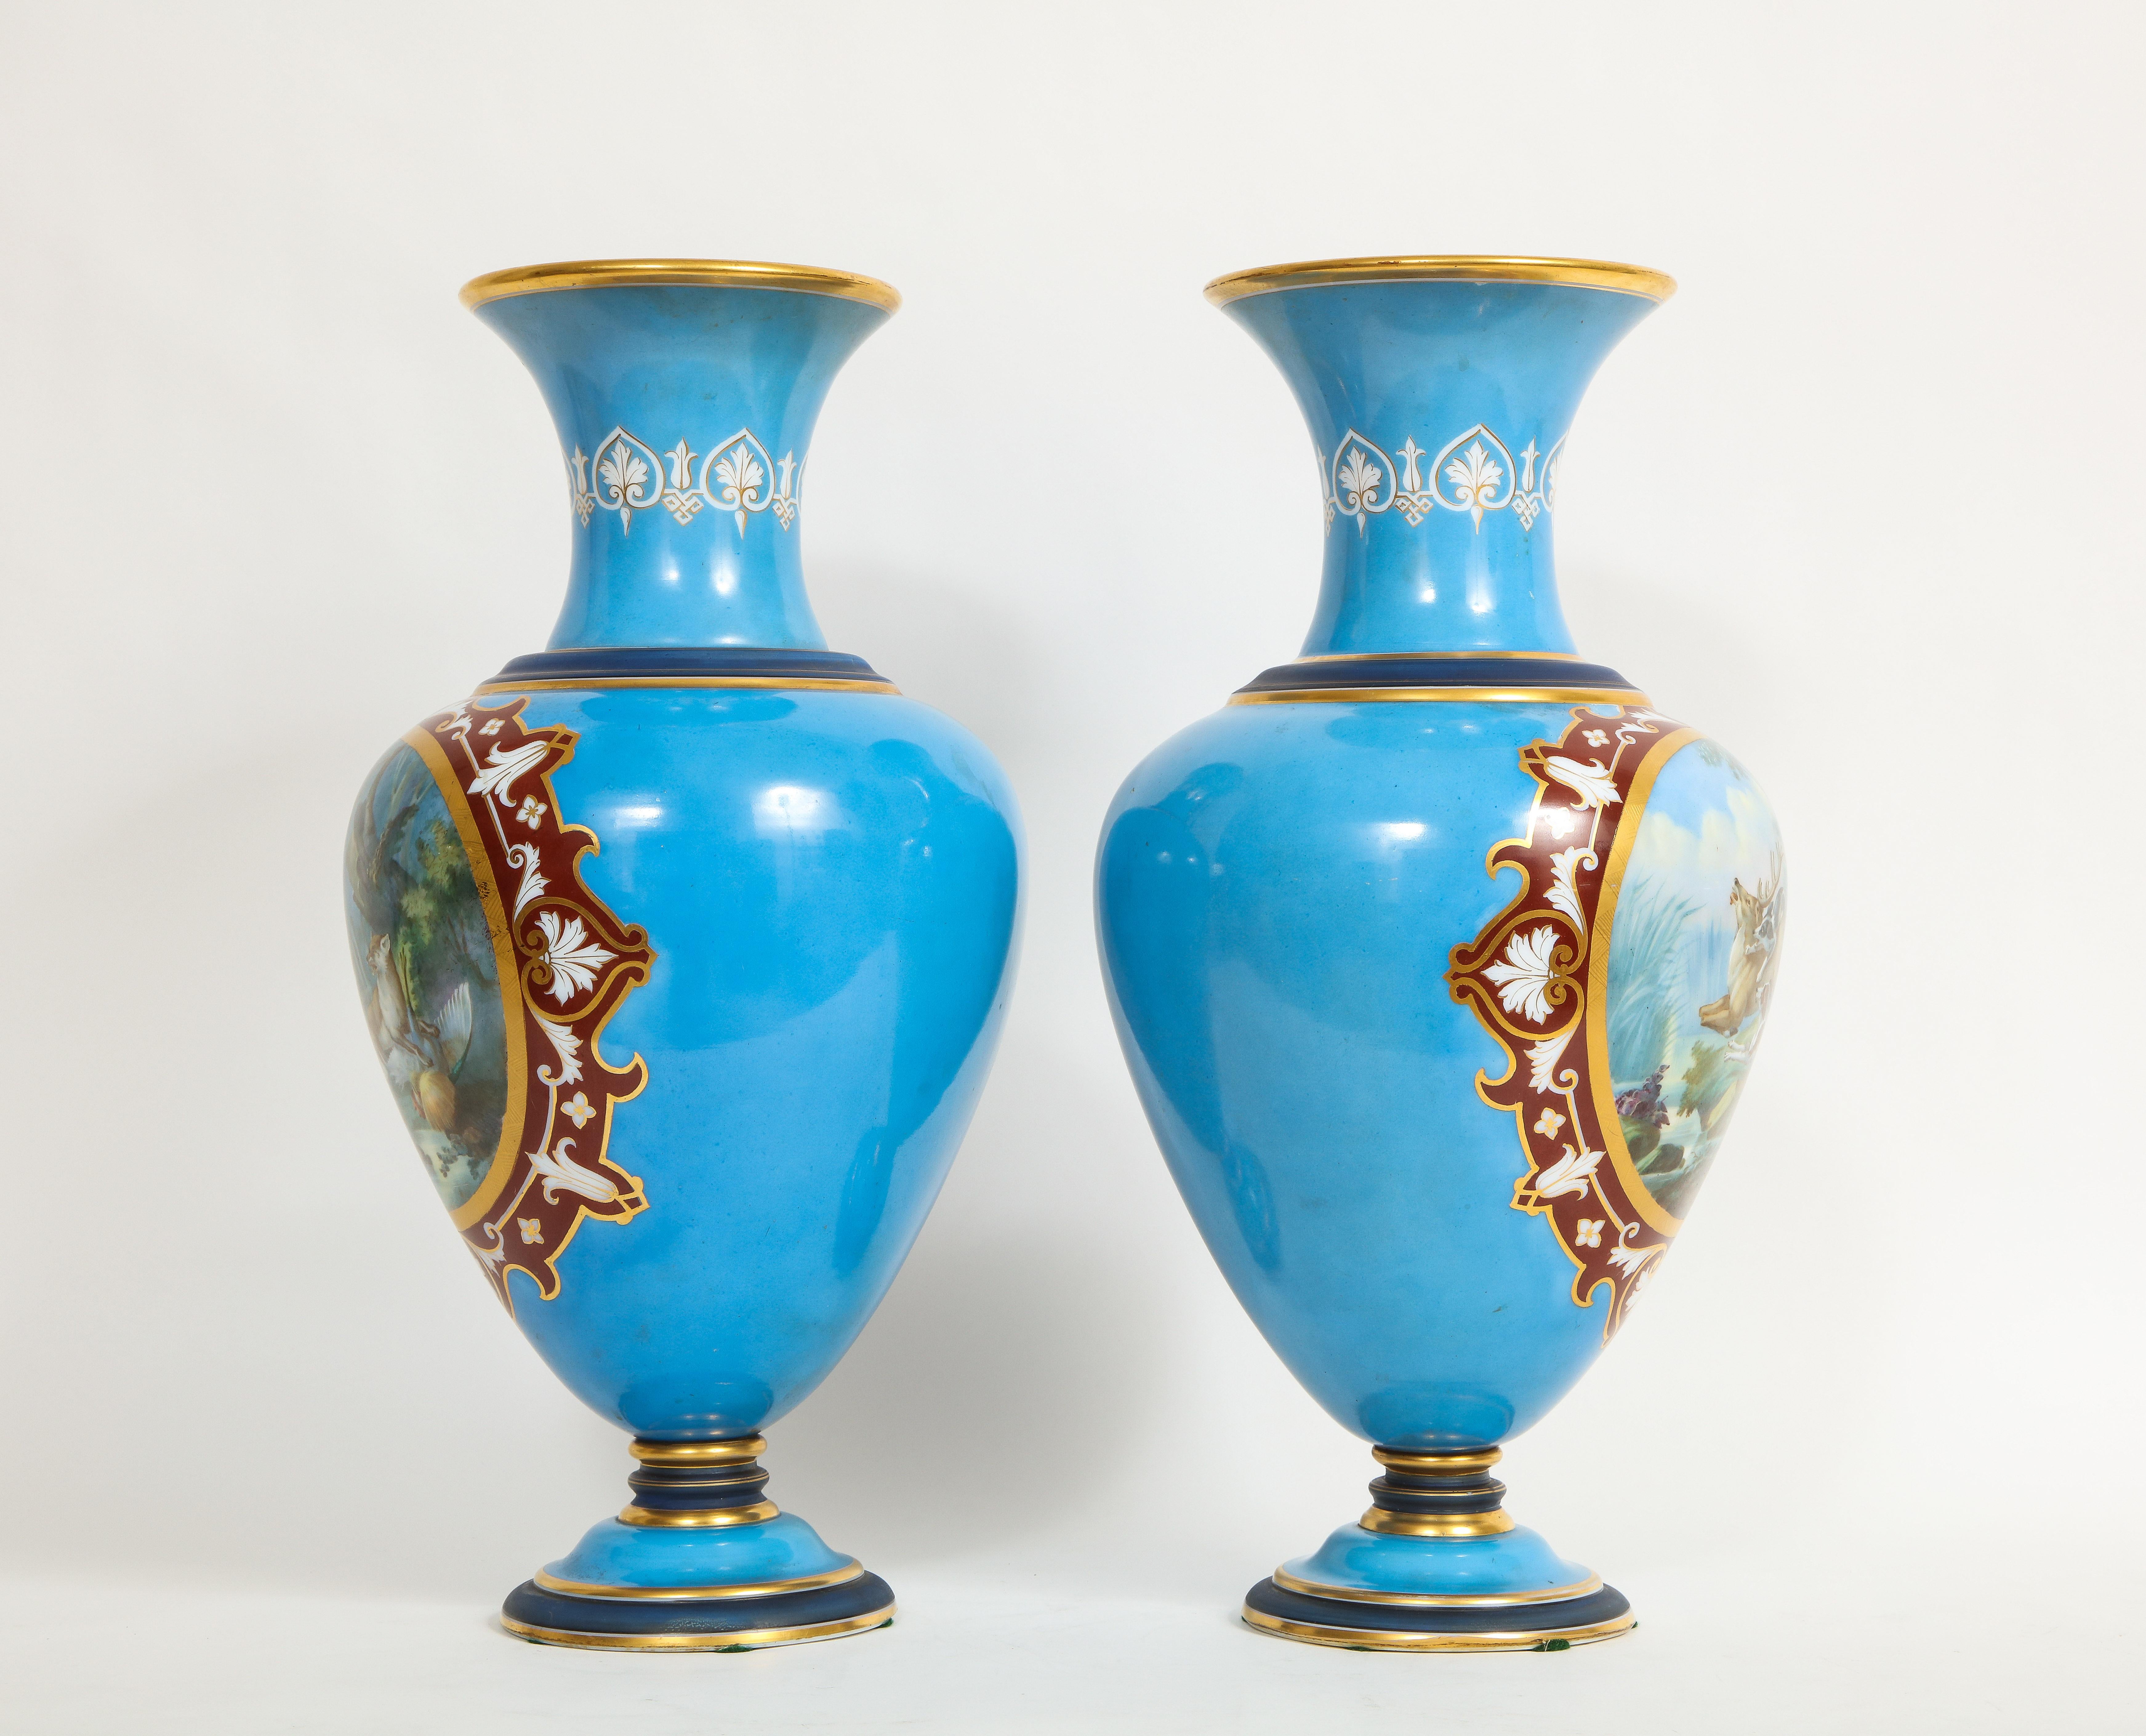 19th Century French Pair of Baccarat Enameled Opaline Vases with Hunting Scenes For Sale 4